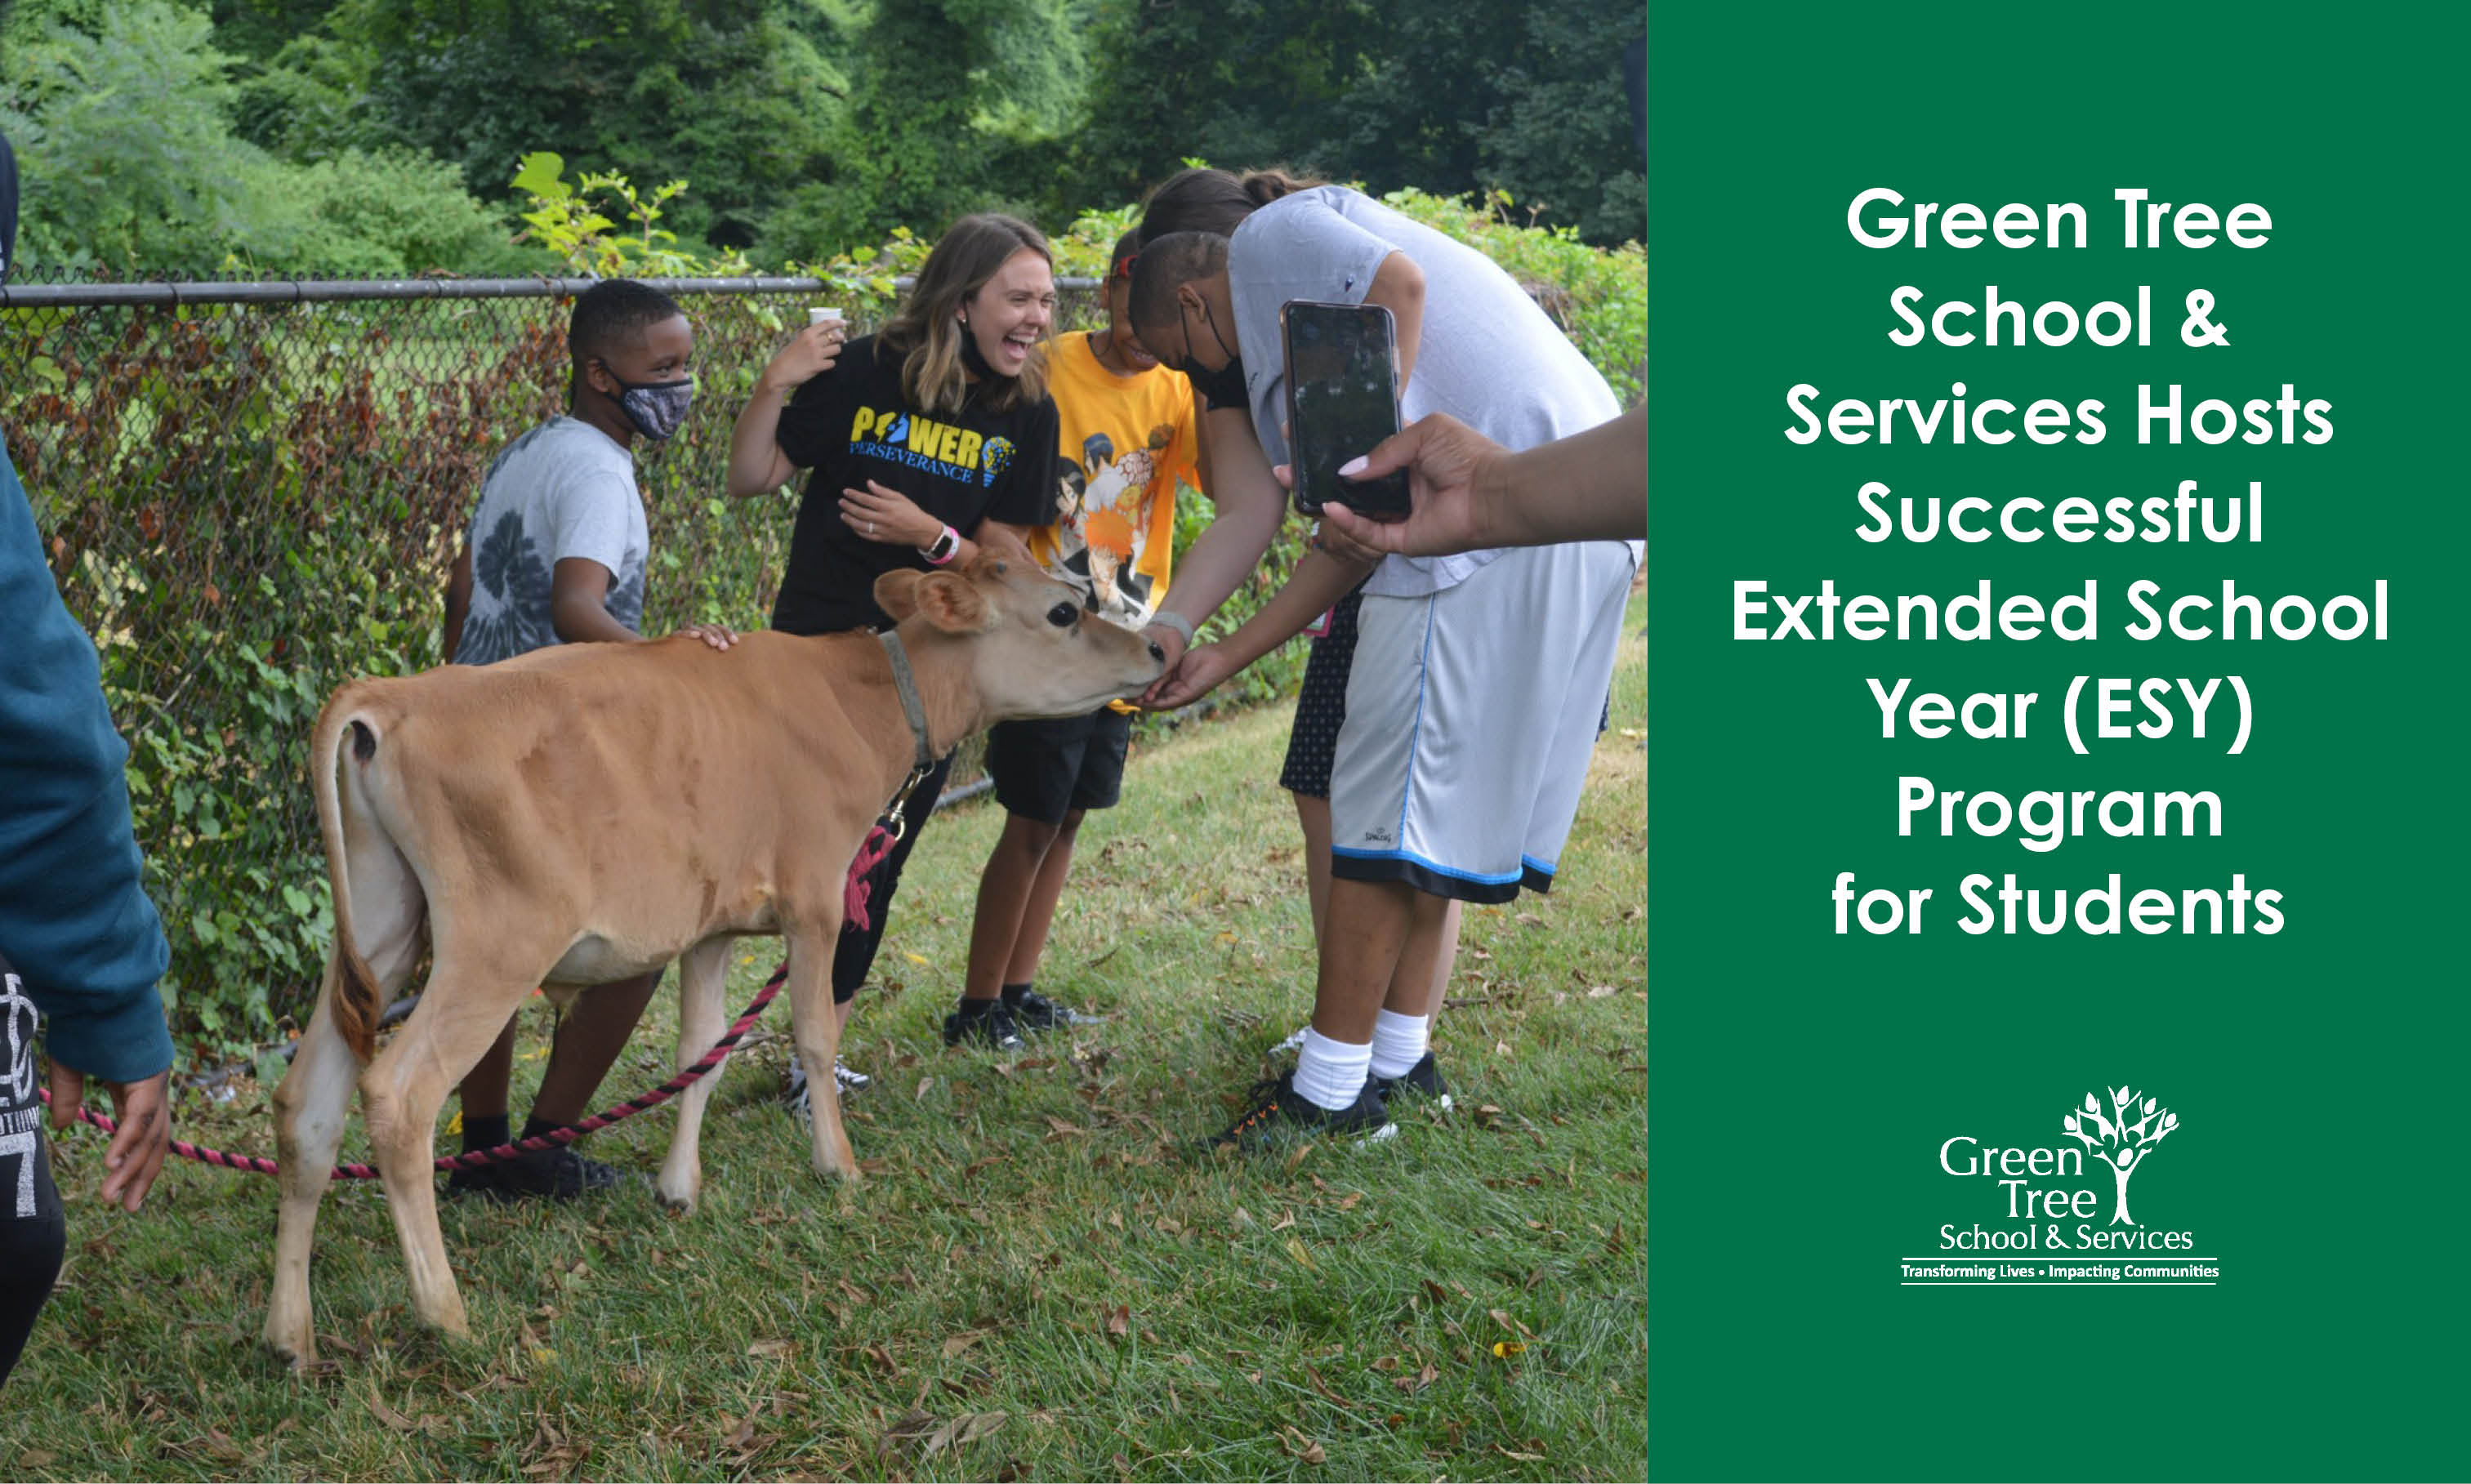 Green Tree School & Services Hosts Successful Extended School Year (ESY) Program for Students 